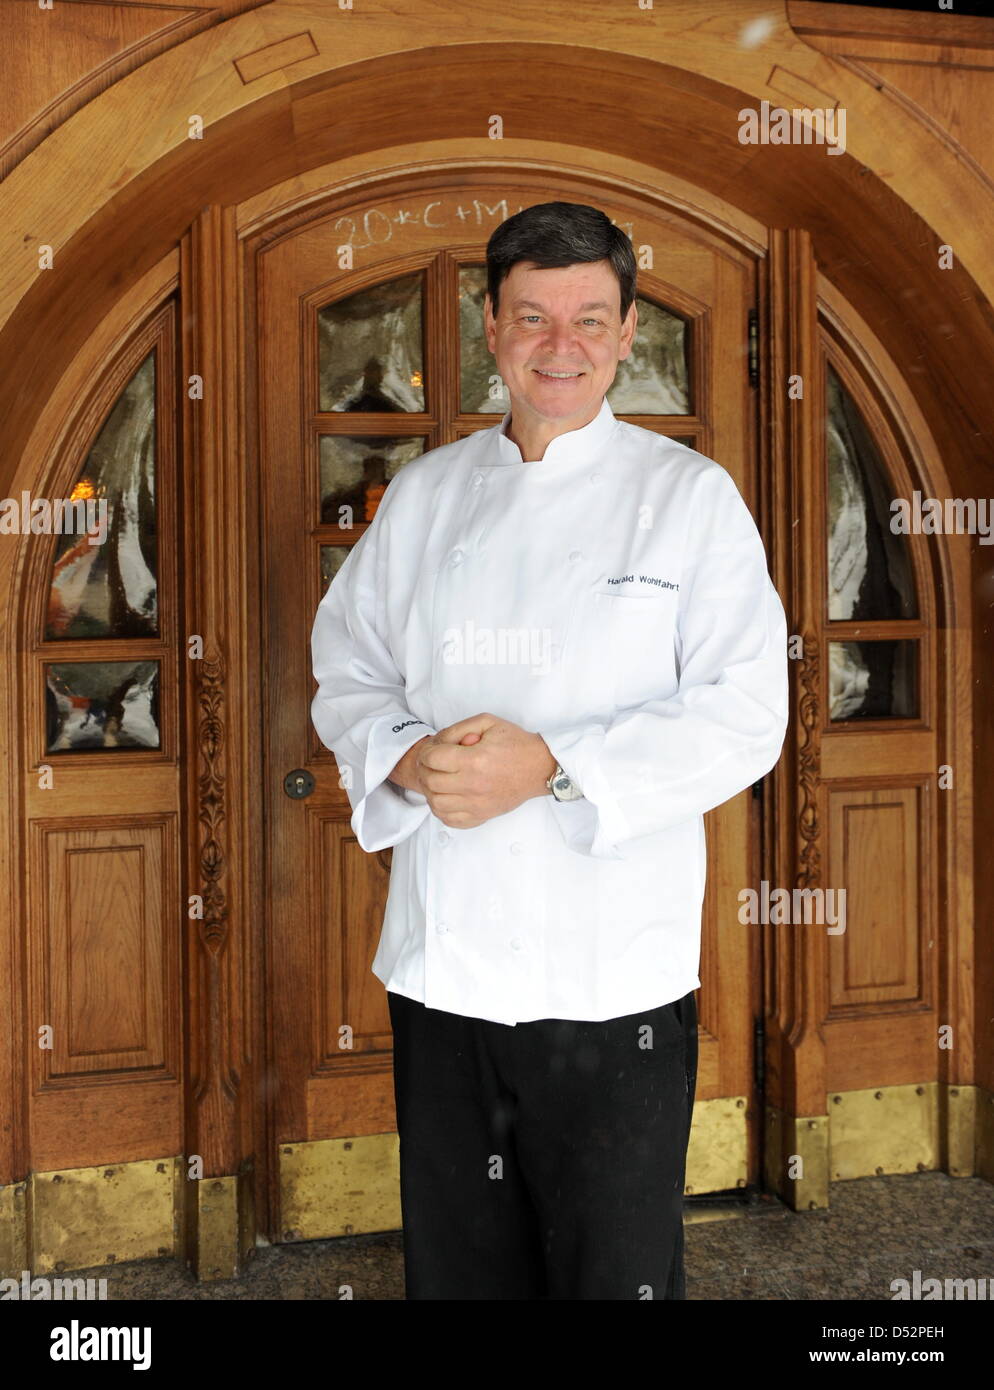 Three star cook Harald Wohlfahrt, considered to be Germany's best cook in the last years, stands in front of the entrance to 'Schwarzwaldstube' restaurant in Baiersbronn-Tonbach, Germany, 05 March 2010. Wohlfahrt is chef of Schwarzwaldstube since 1980. He received his third Michelin star in 1992. Photo: Bernd Weissbrod Stock Photo